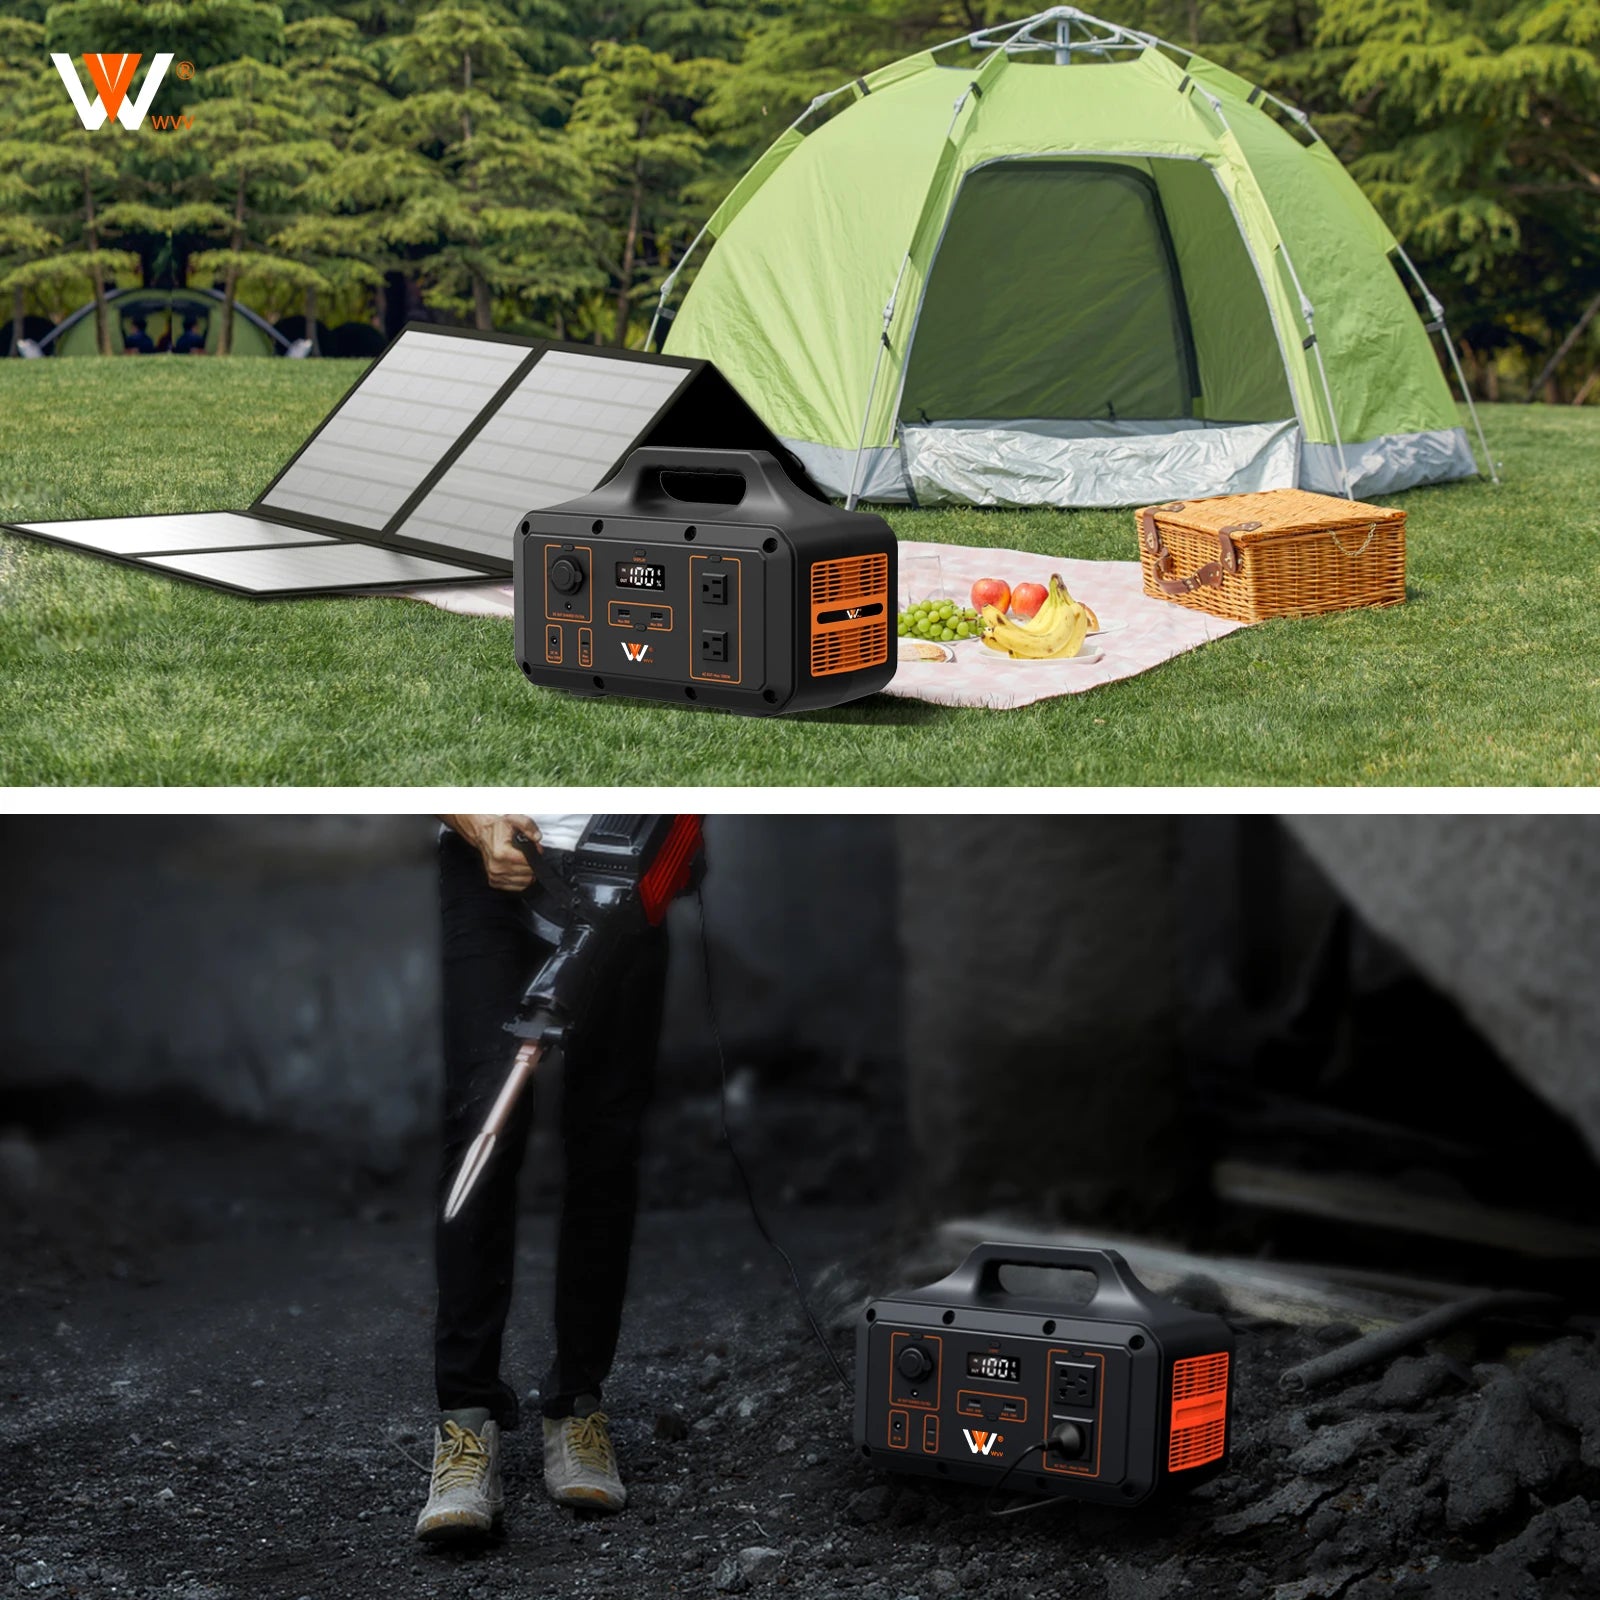 Barler 1000w Portable Power Station, Portable power station with MPPT controller for efficient recharging on-the-go.